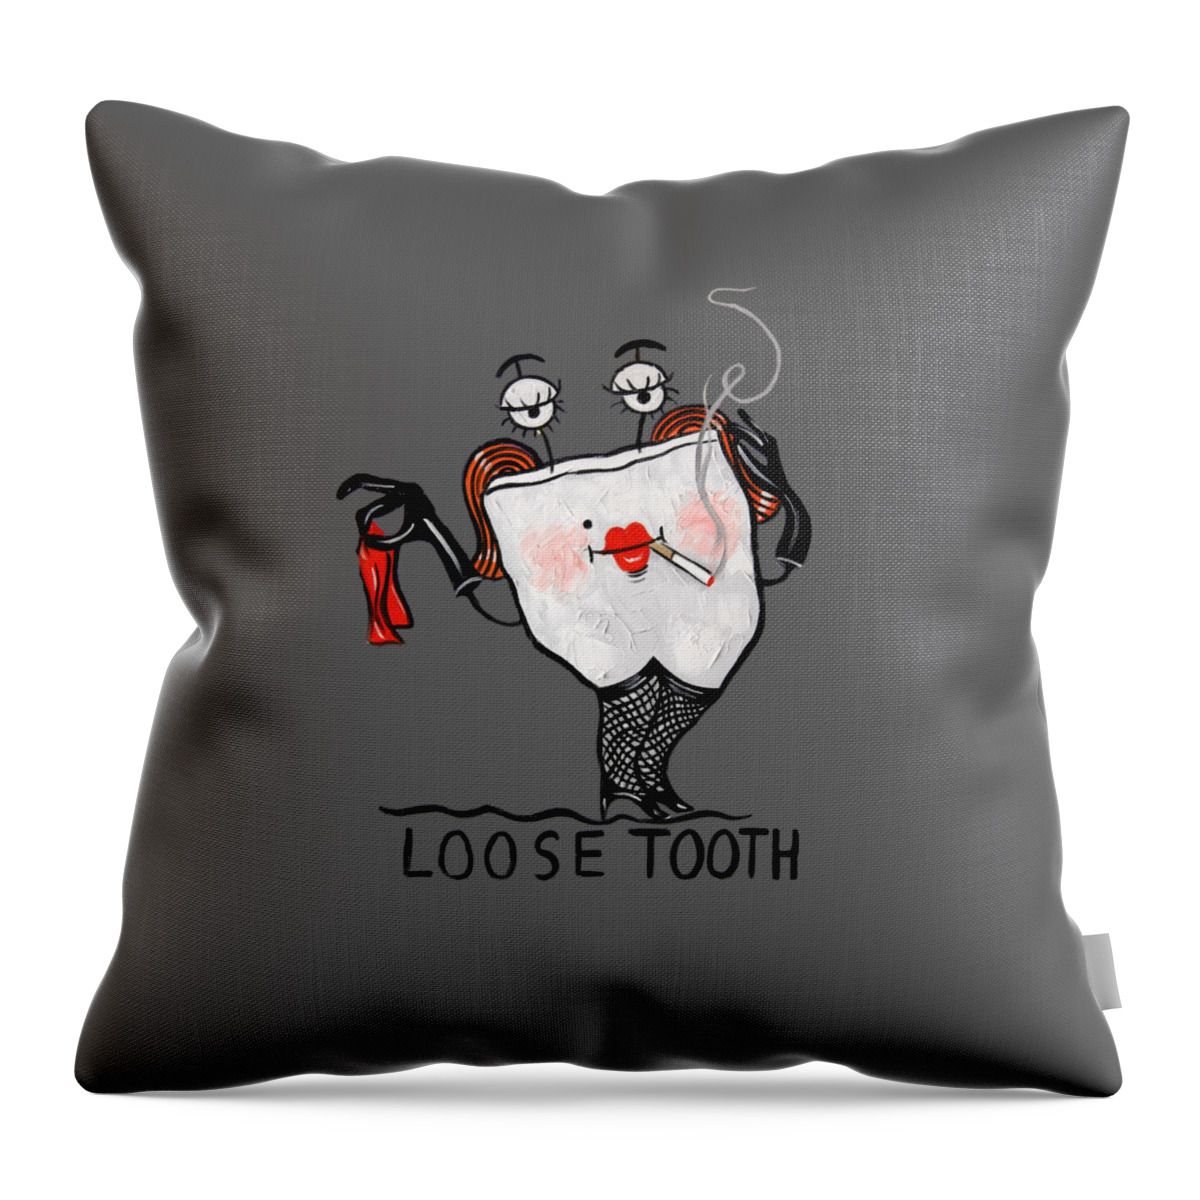 Loose Tooth T-shirt Throw Pillow featuring the painting Loose Tooth T-Shirt by Anthony Falbo